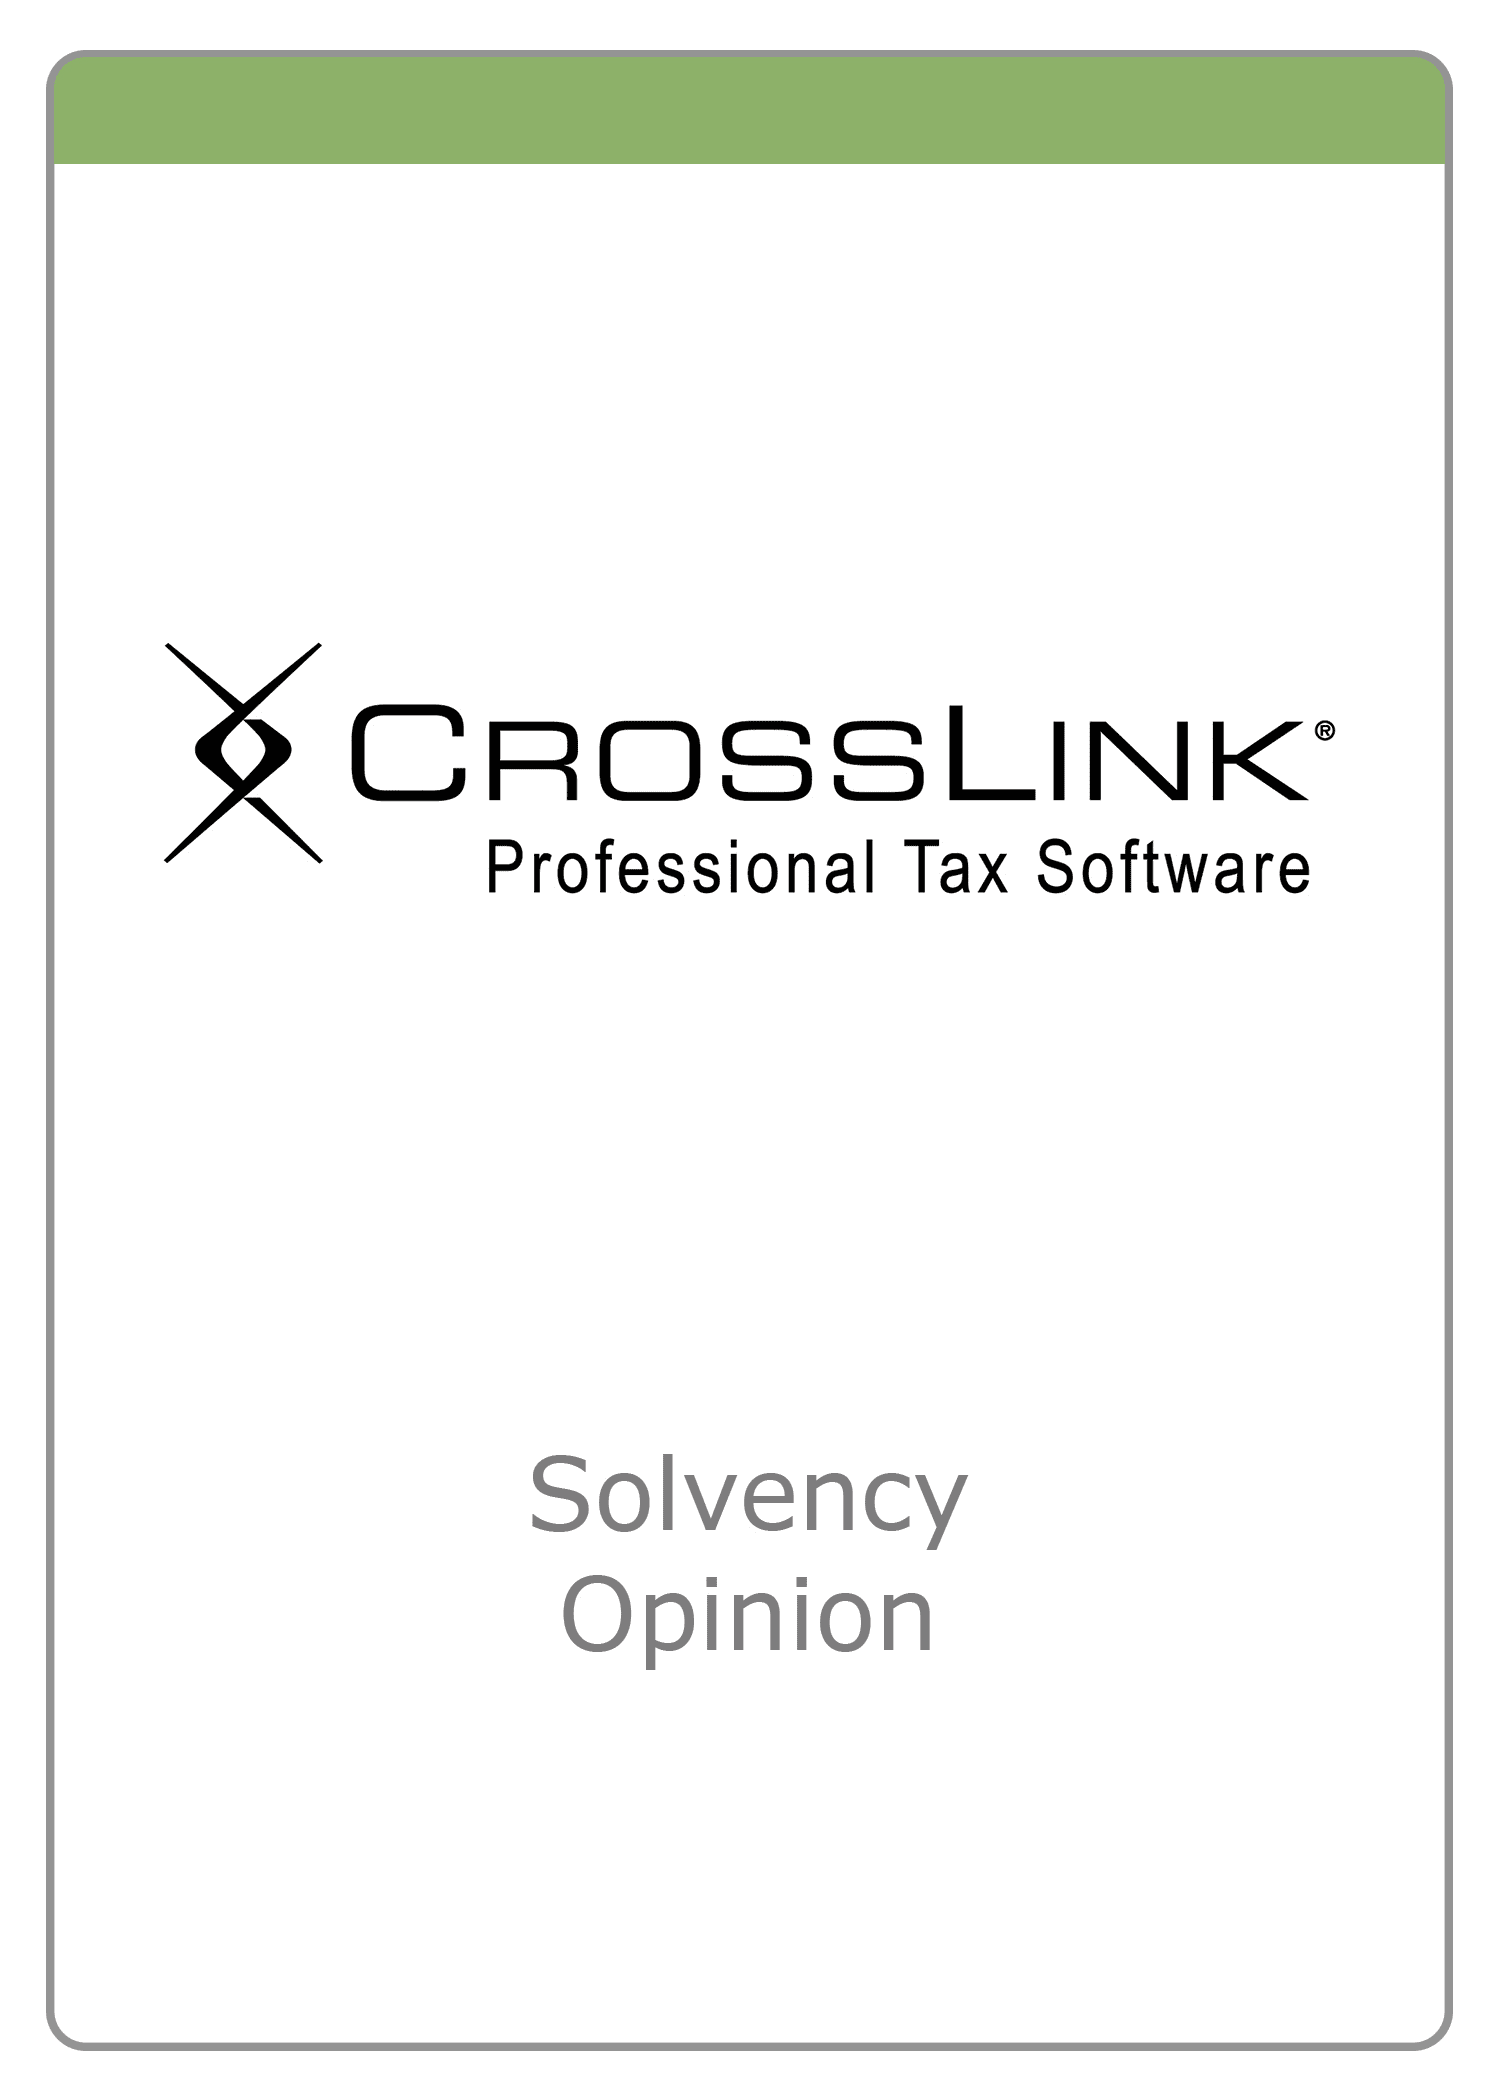 CrossLink - Transaction Opinions - The McLean Group